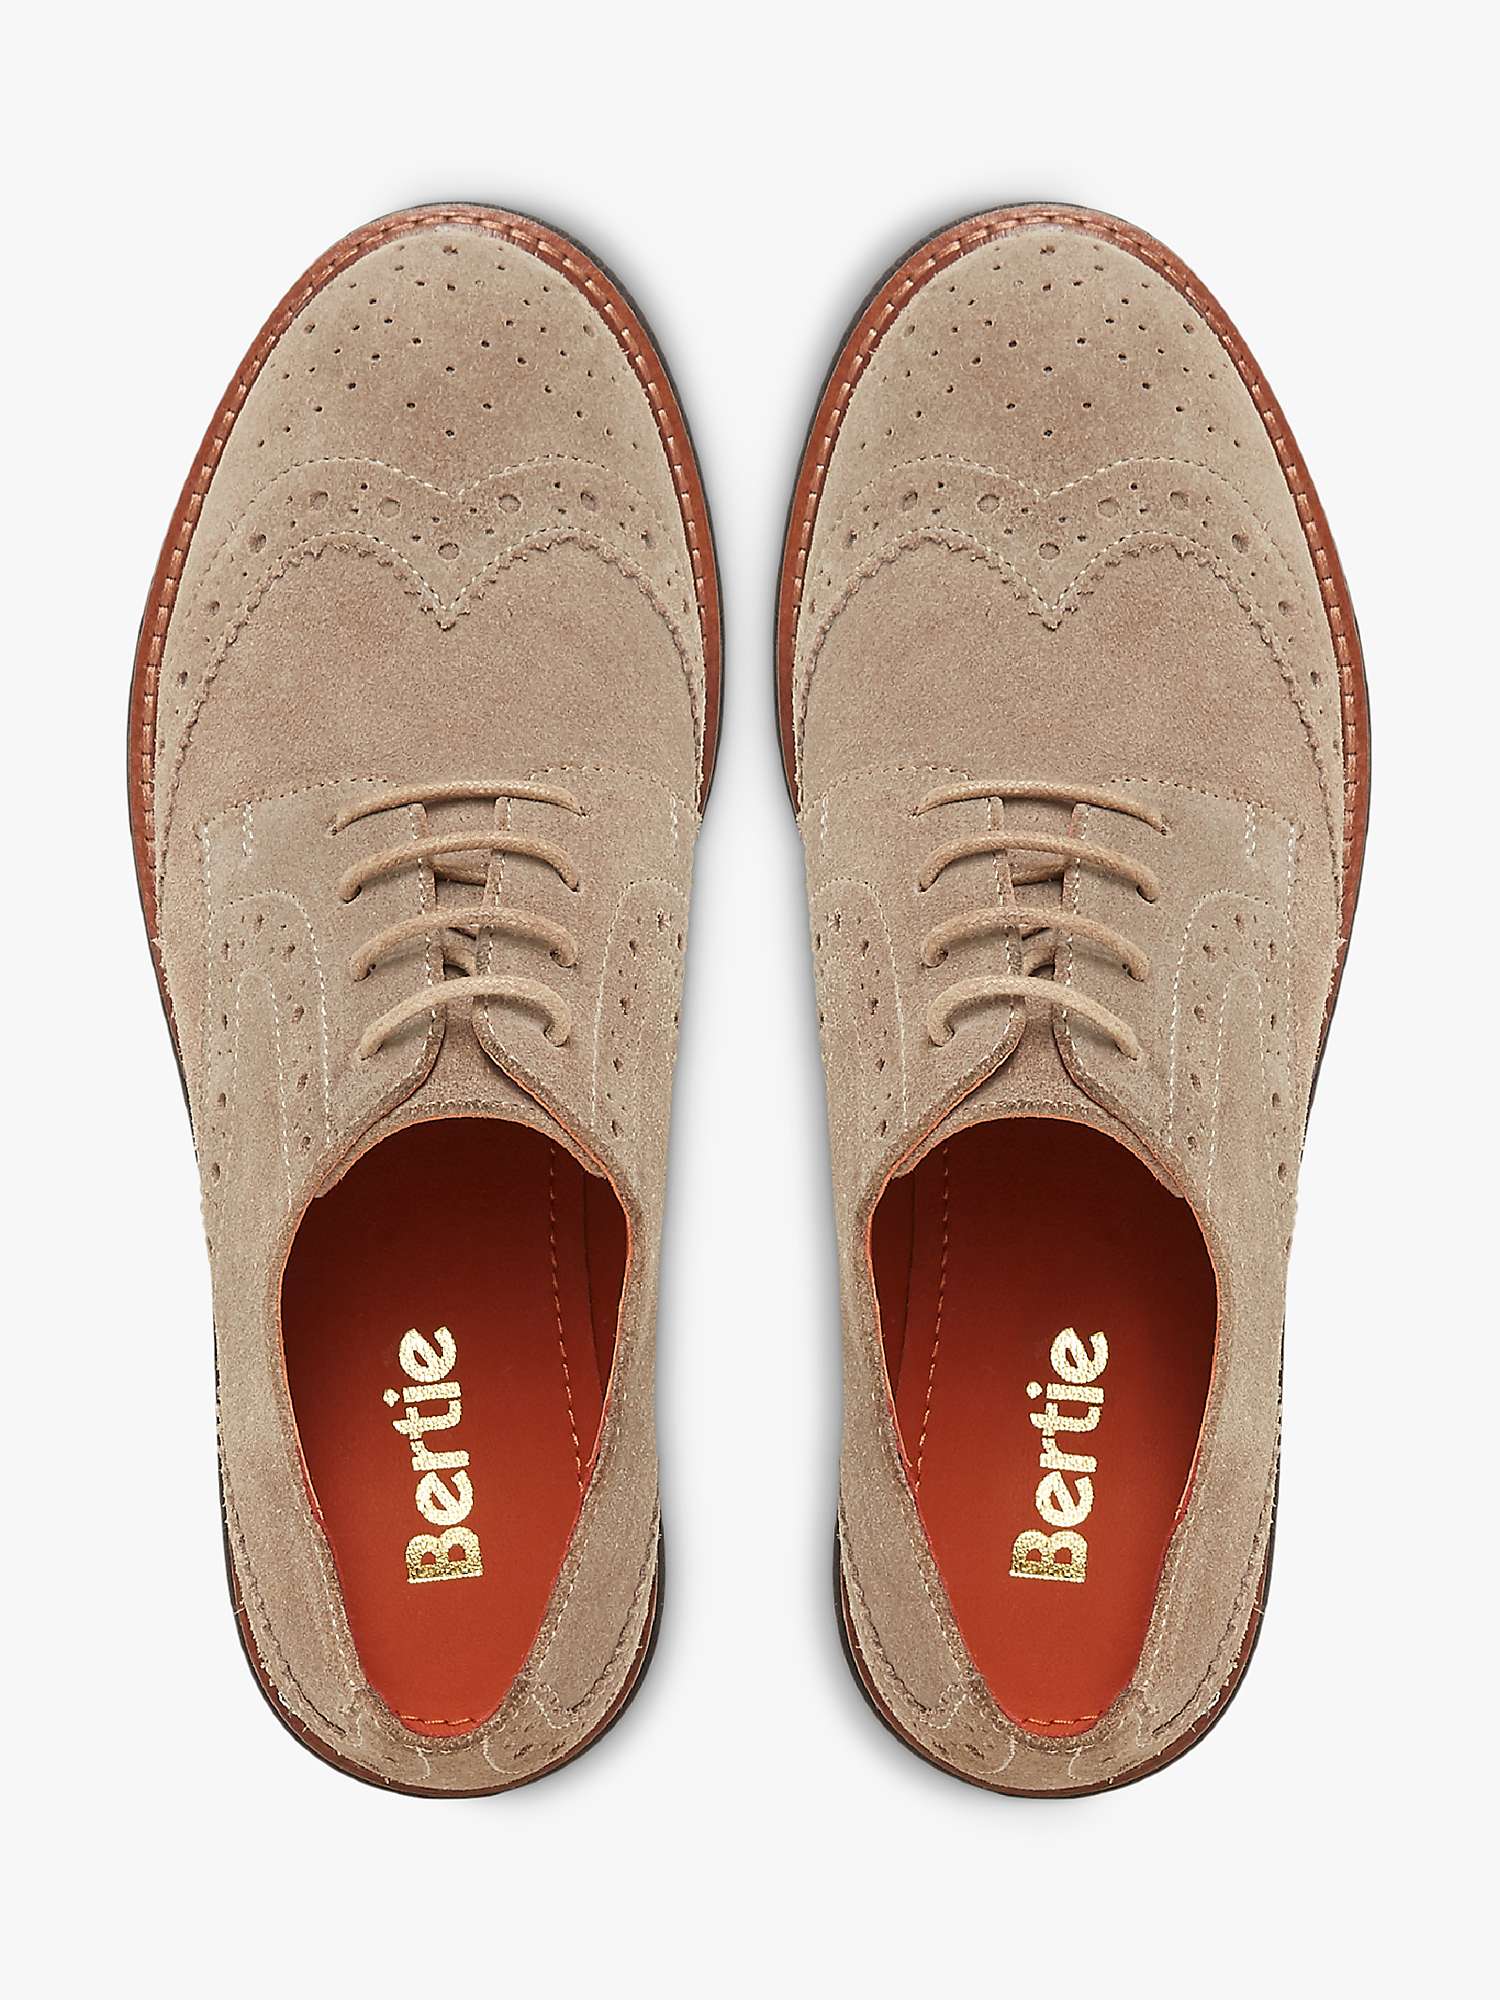 Buy Bertie Fantasy Suede Lace Up Brogues, Taupe Online at johnlewis.com